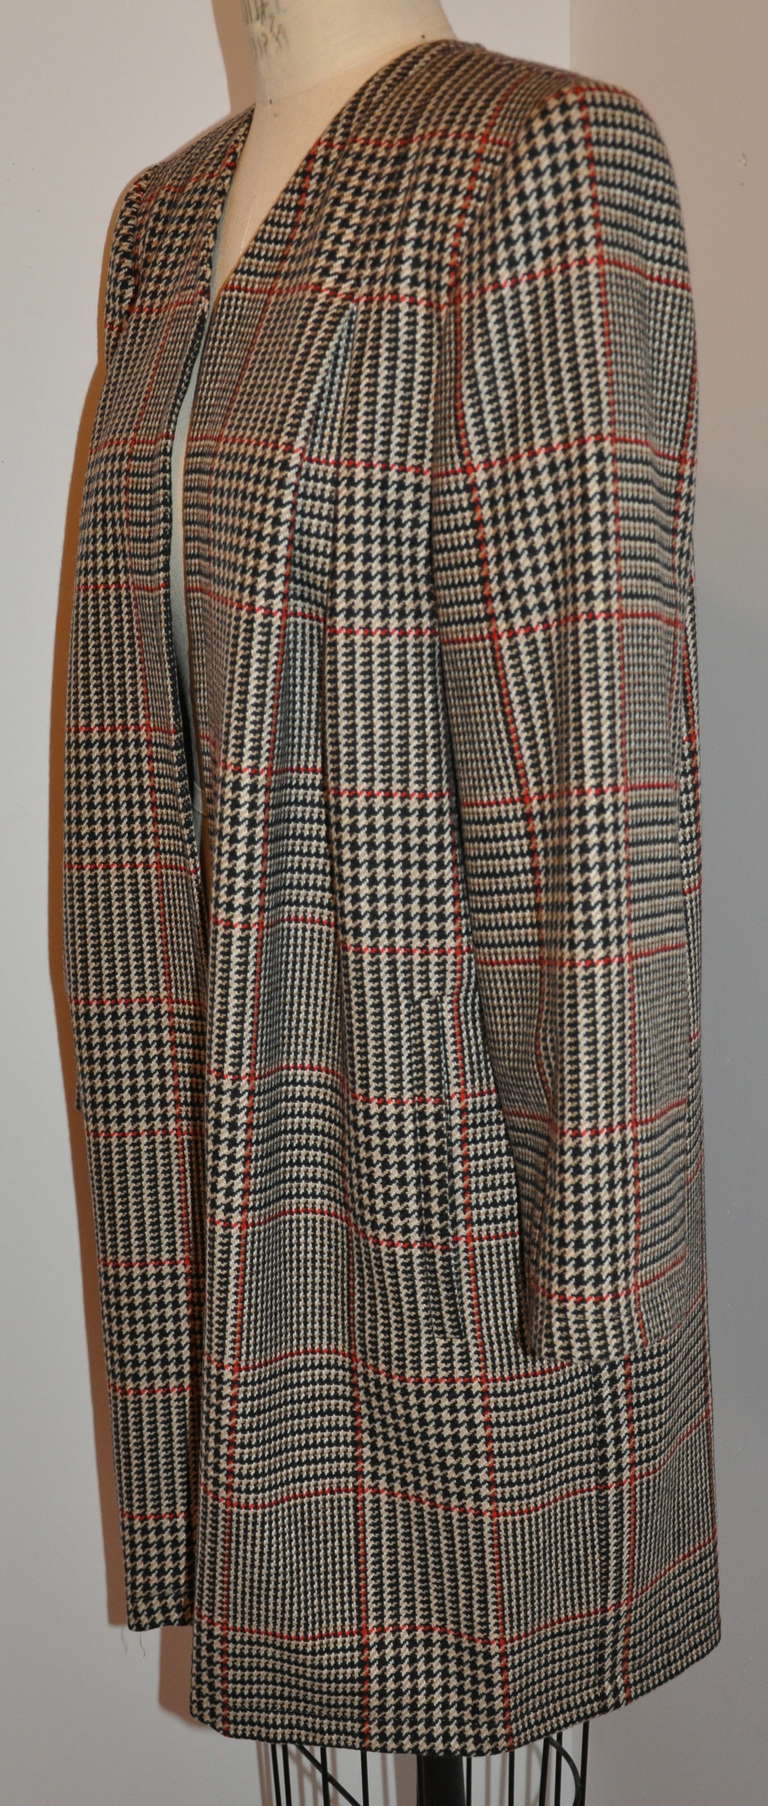 This classically Valentino plaid open coat is fully lined. The multi-colors of the plaid are in black, red, camel and cream. Padded shoulders of this lightweight car coat hangs just beautifully on the wearer.
   The front measures 30